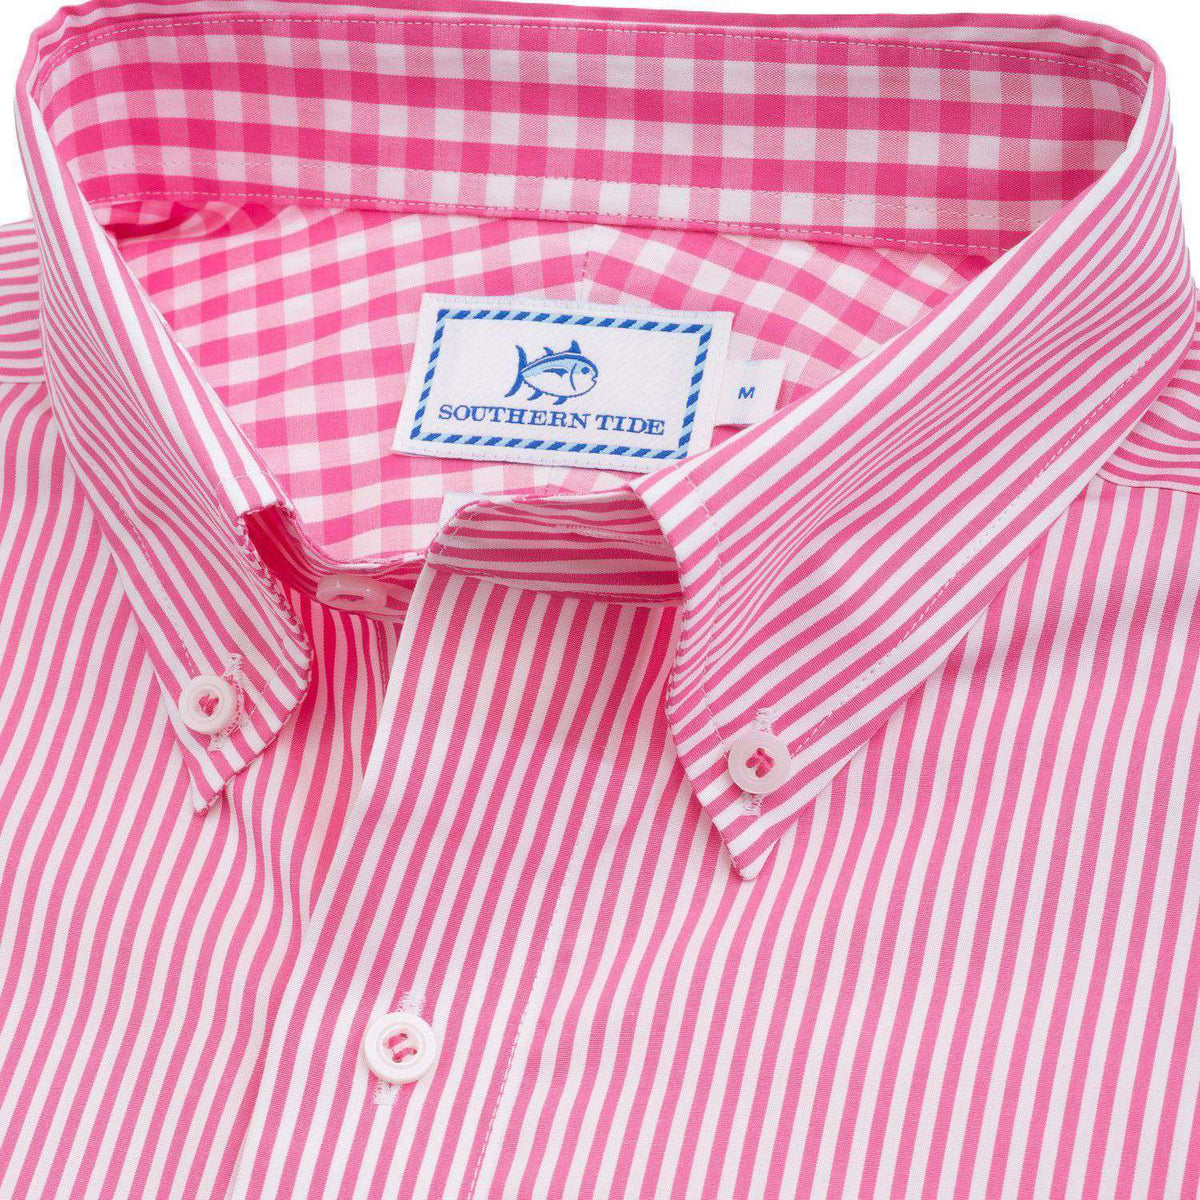 New Street Stripe Sport Shirt in Ultra Pink by Southern Tide - Country Club Prep